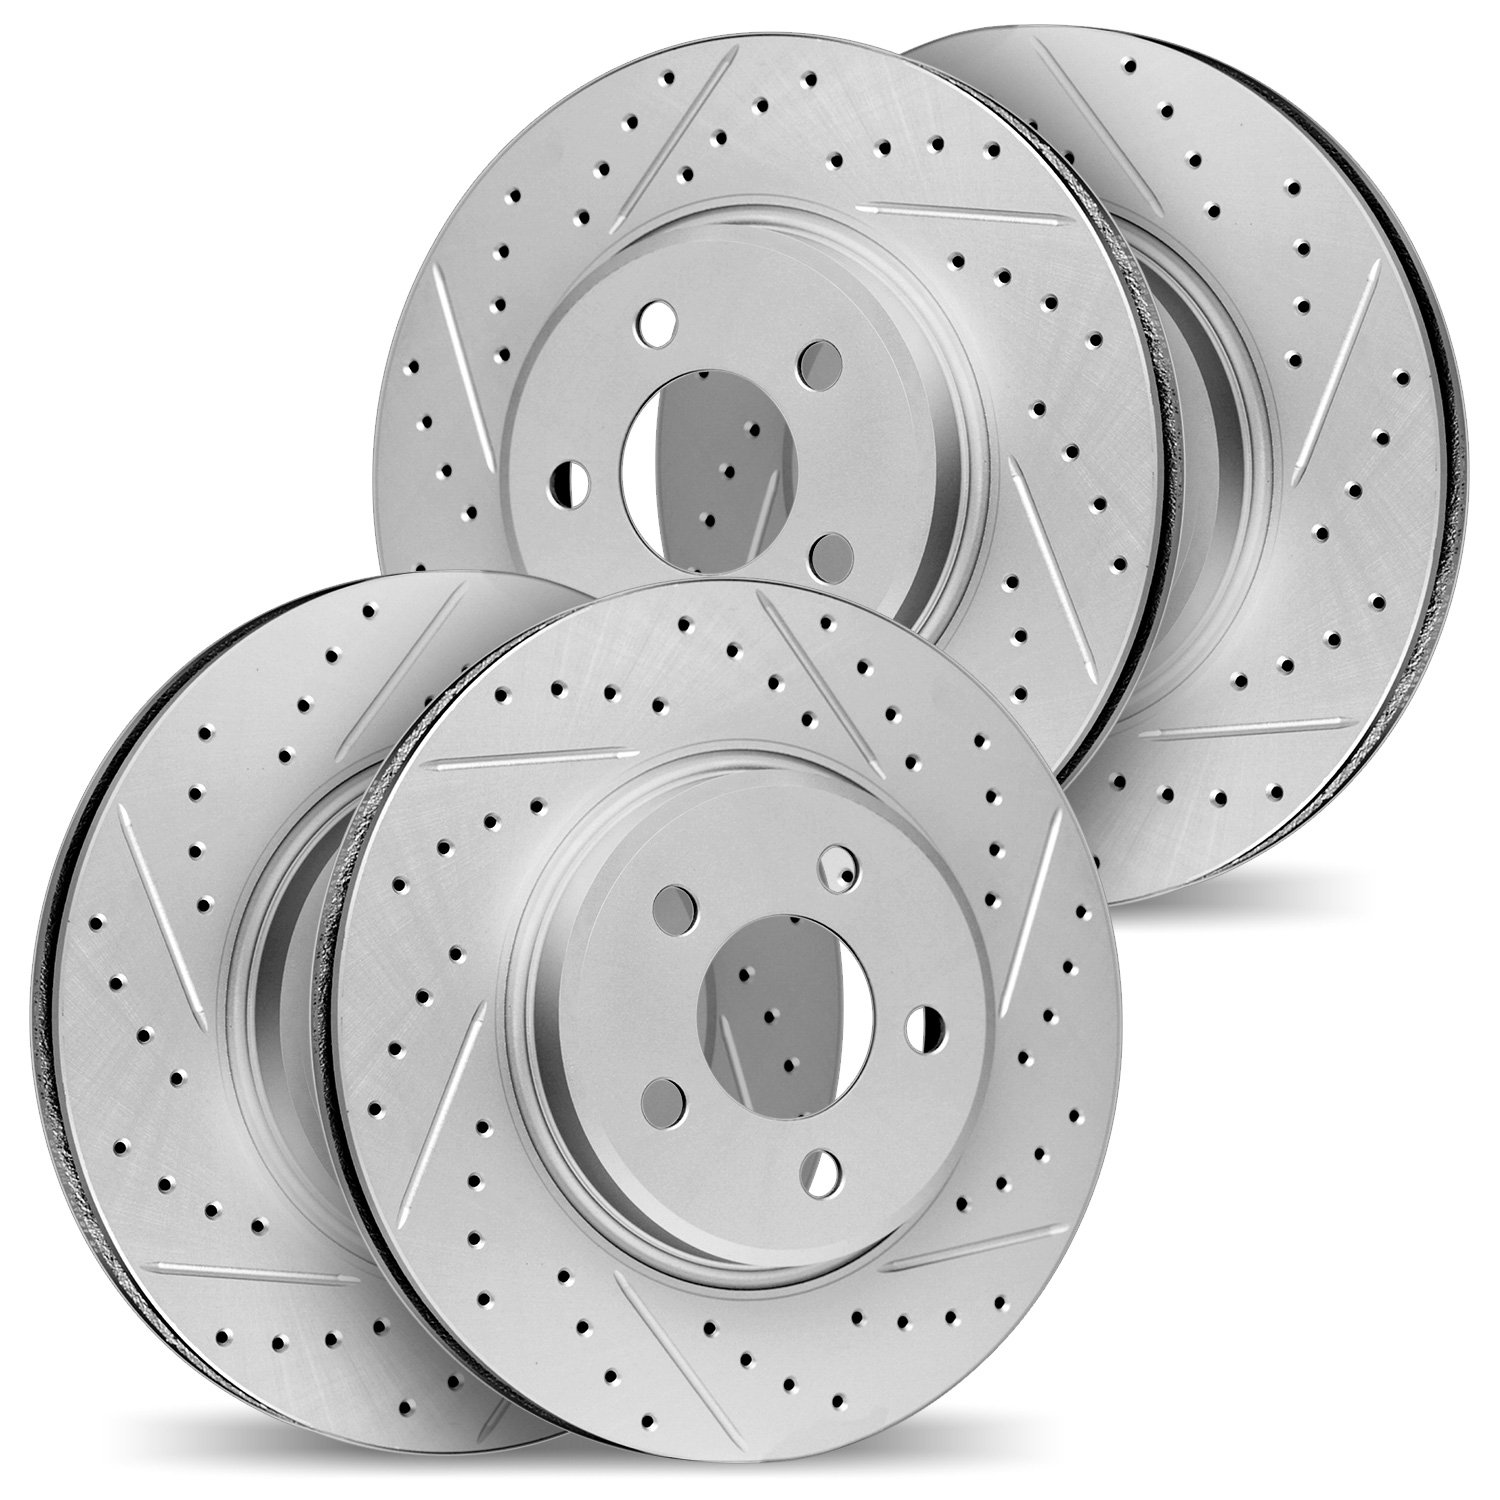 2004-80024 Geoperformance Drilled/Slotted Brake Rotors, 2007-2012 Ford/Lincoln/Mercury/Mazda, Position: Front and Rear